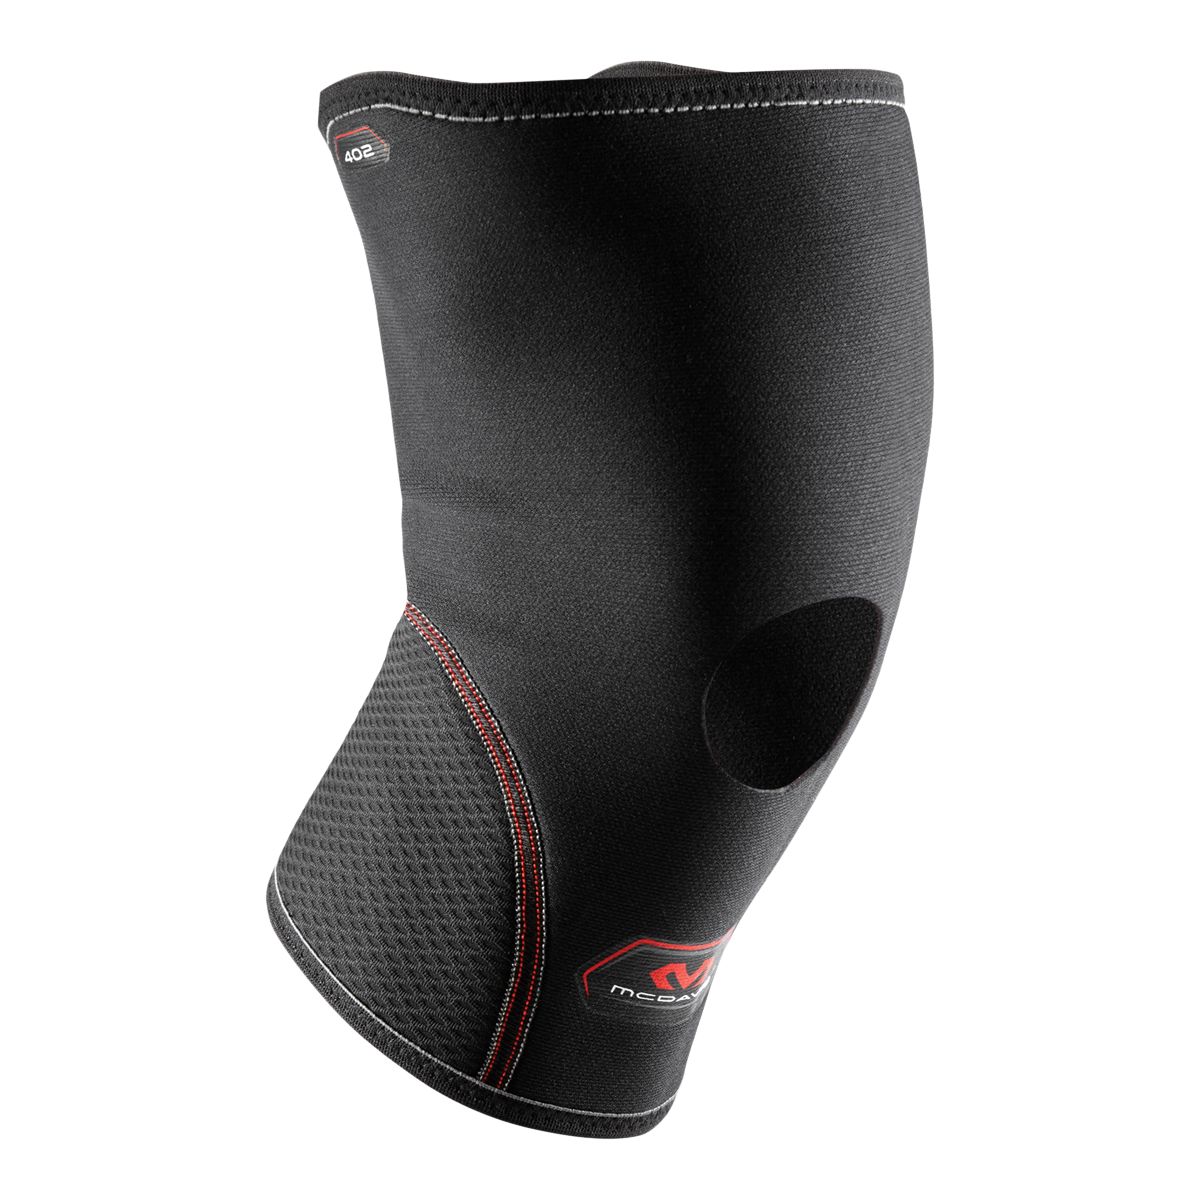 McDavid Knee Support with Open Patella